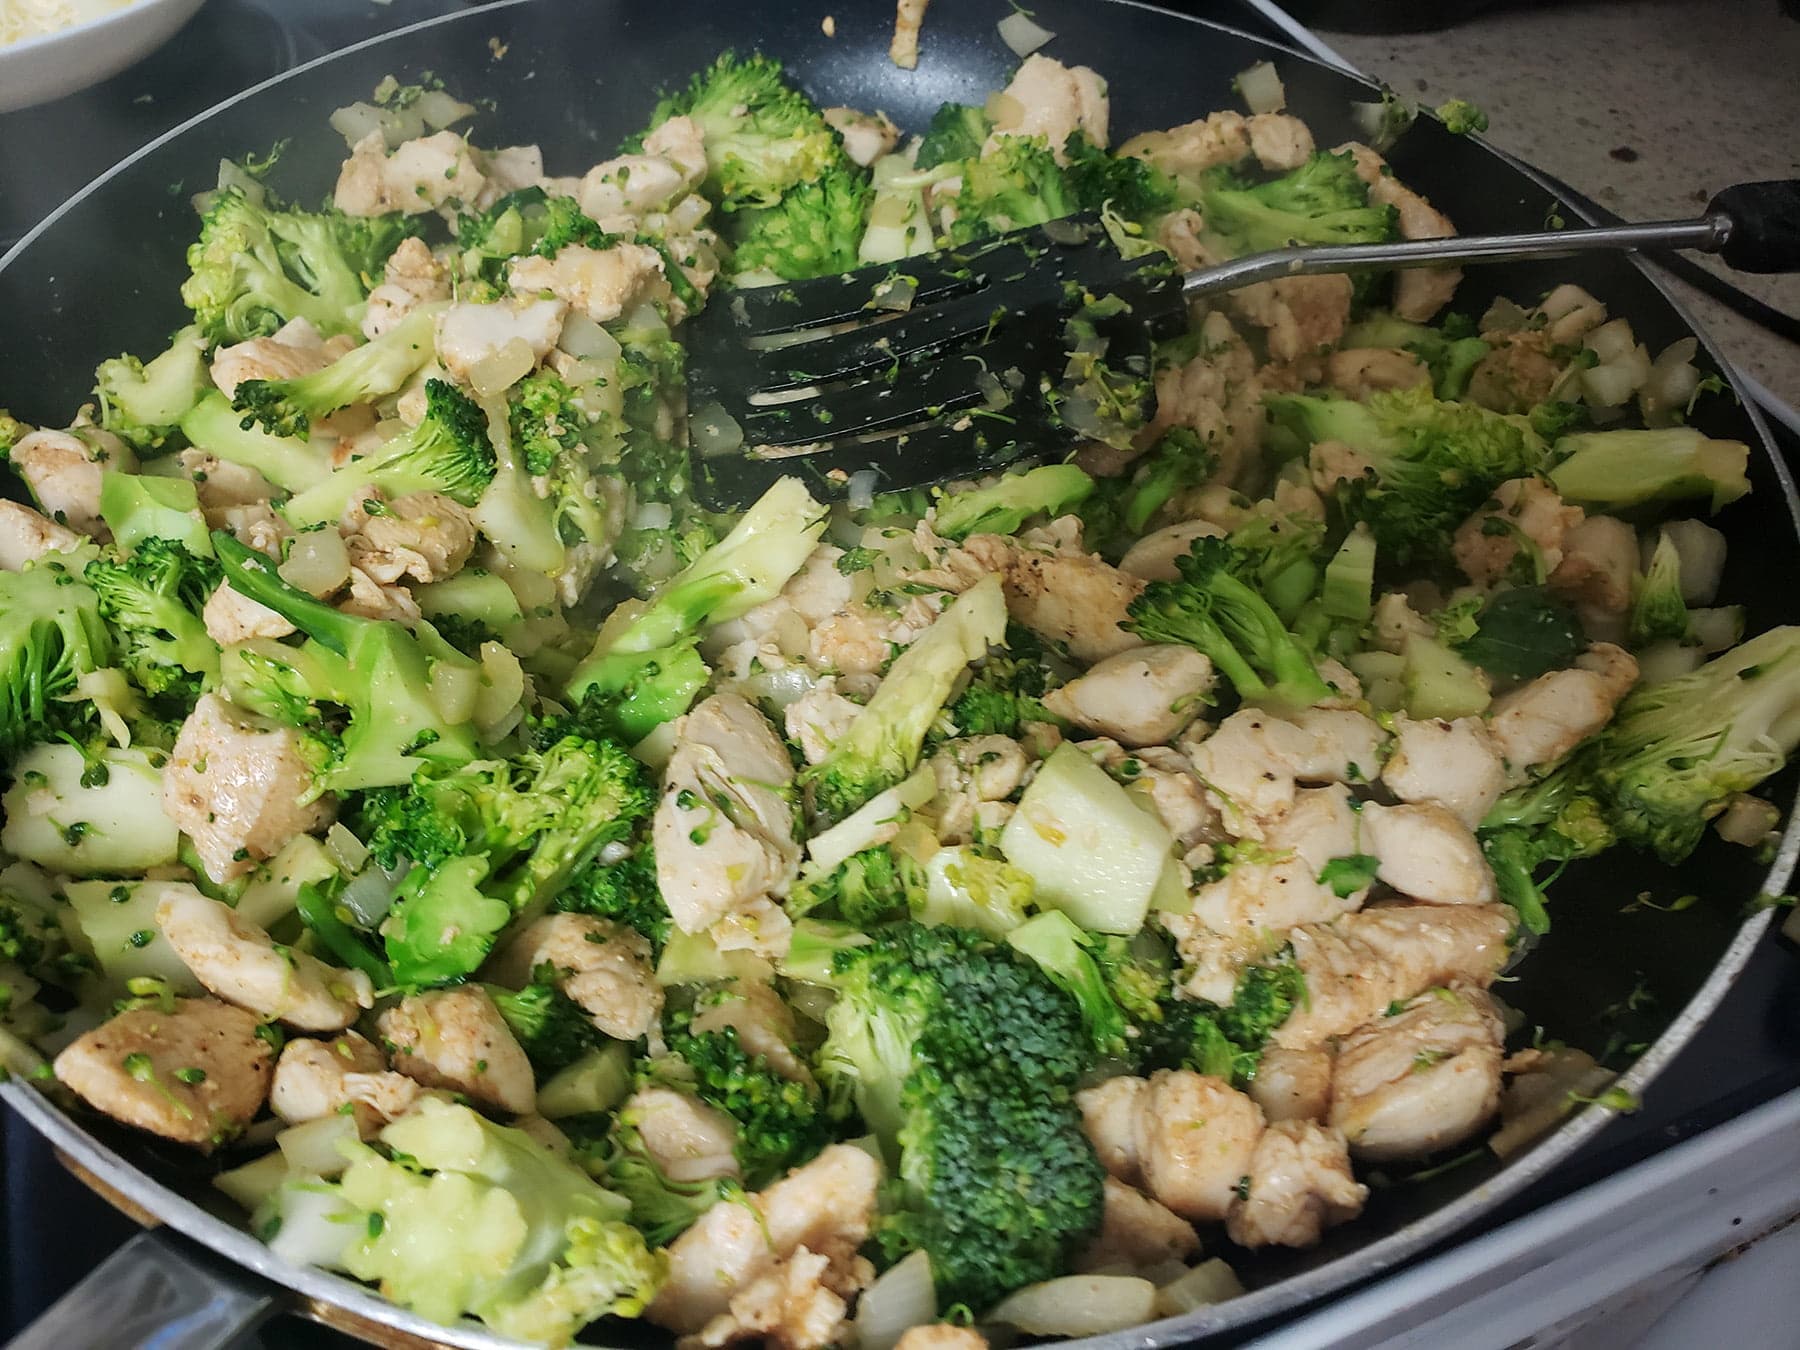 Close up view of a pan of sauteed broccoli, onion, and chicken.